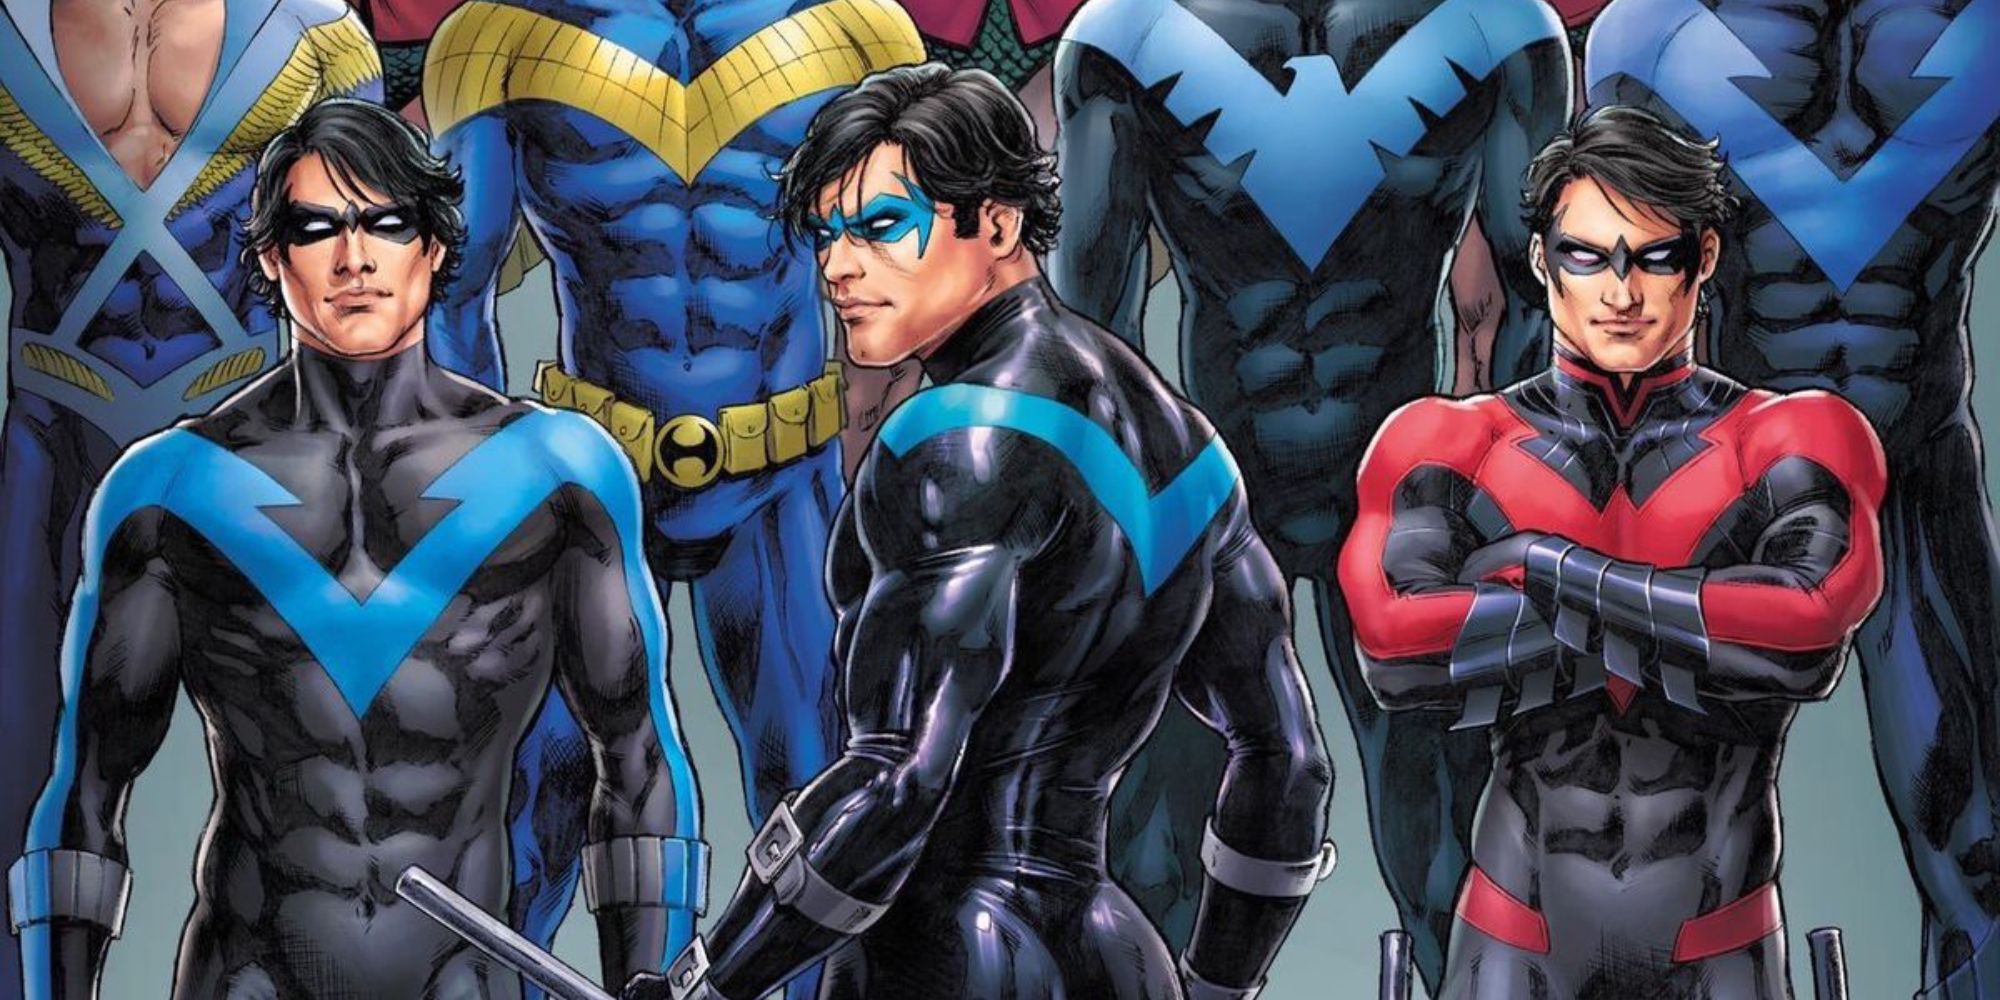 10 Best Love Interests of Dick Grayson's Nightwing, The First Robin